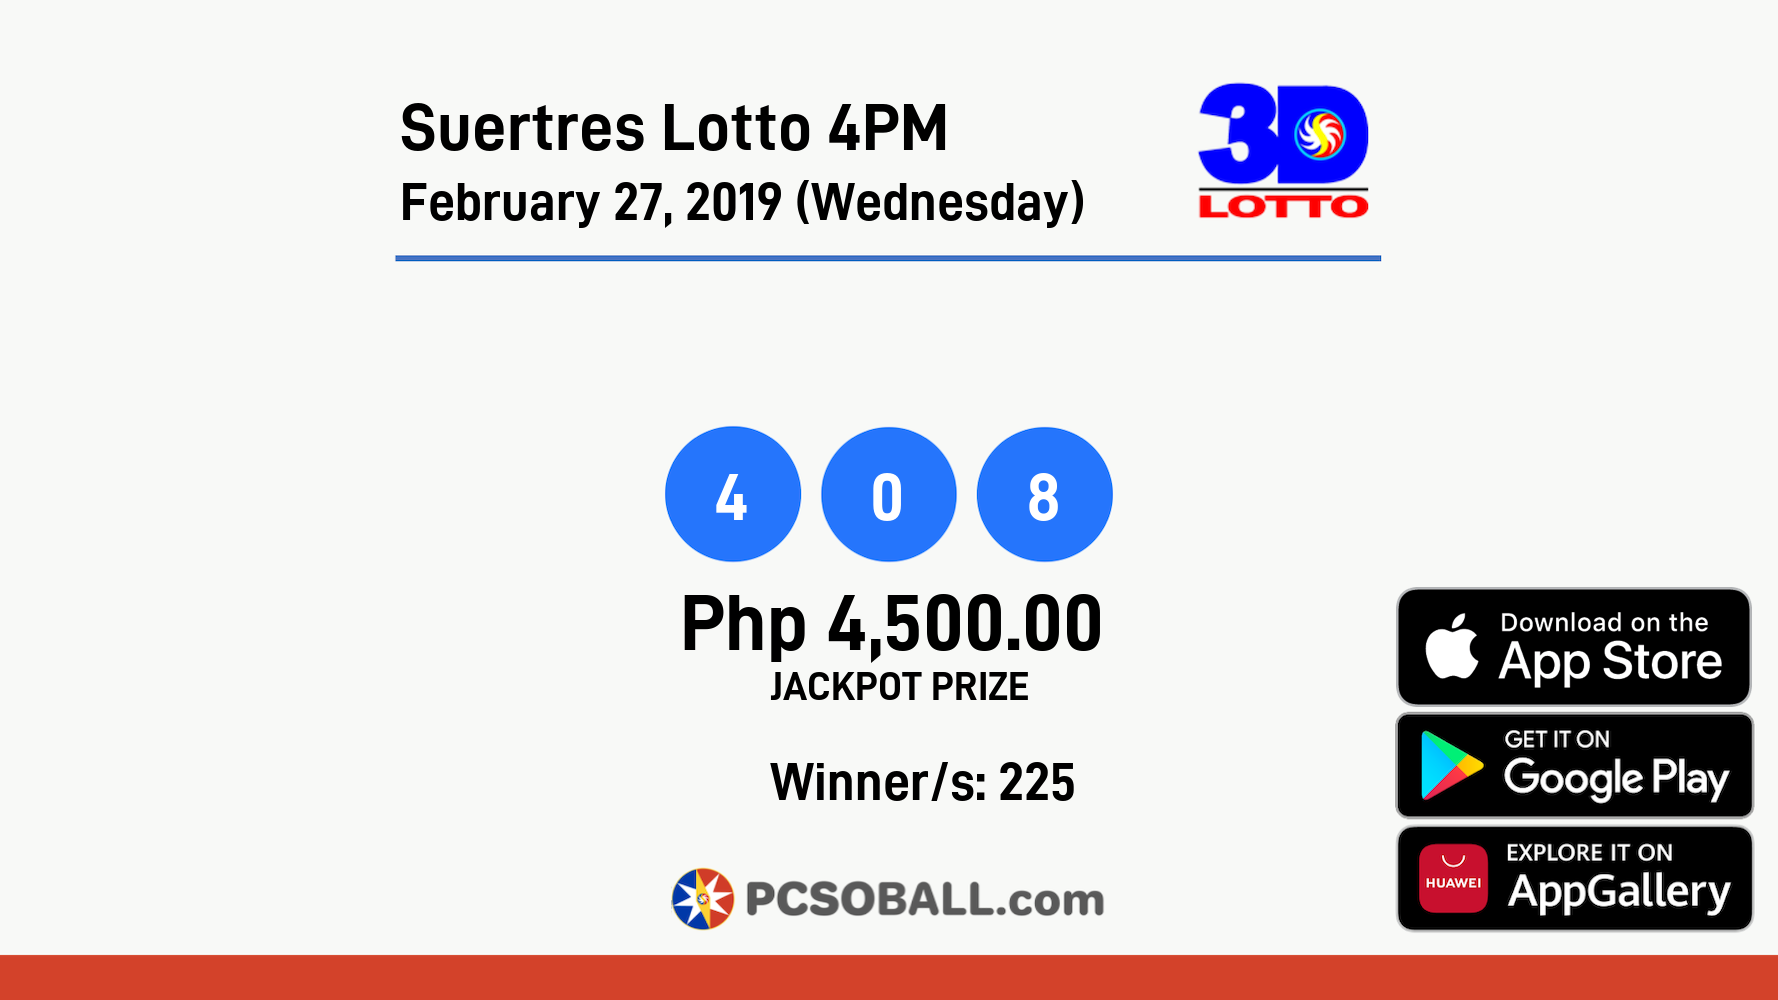 Suertres Lotto 4PM February 27, 2019 (Wednesday) Result